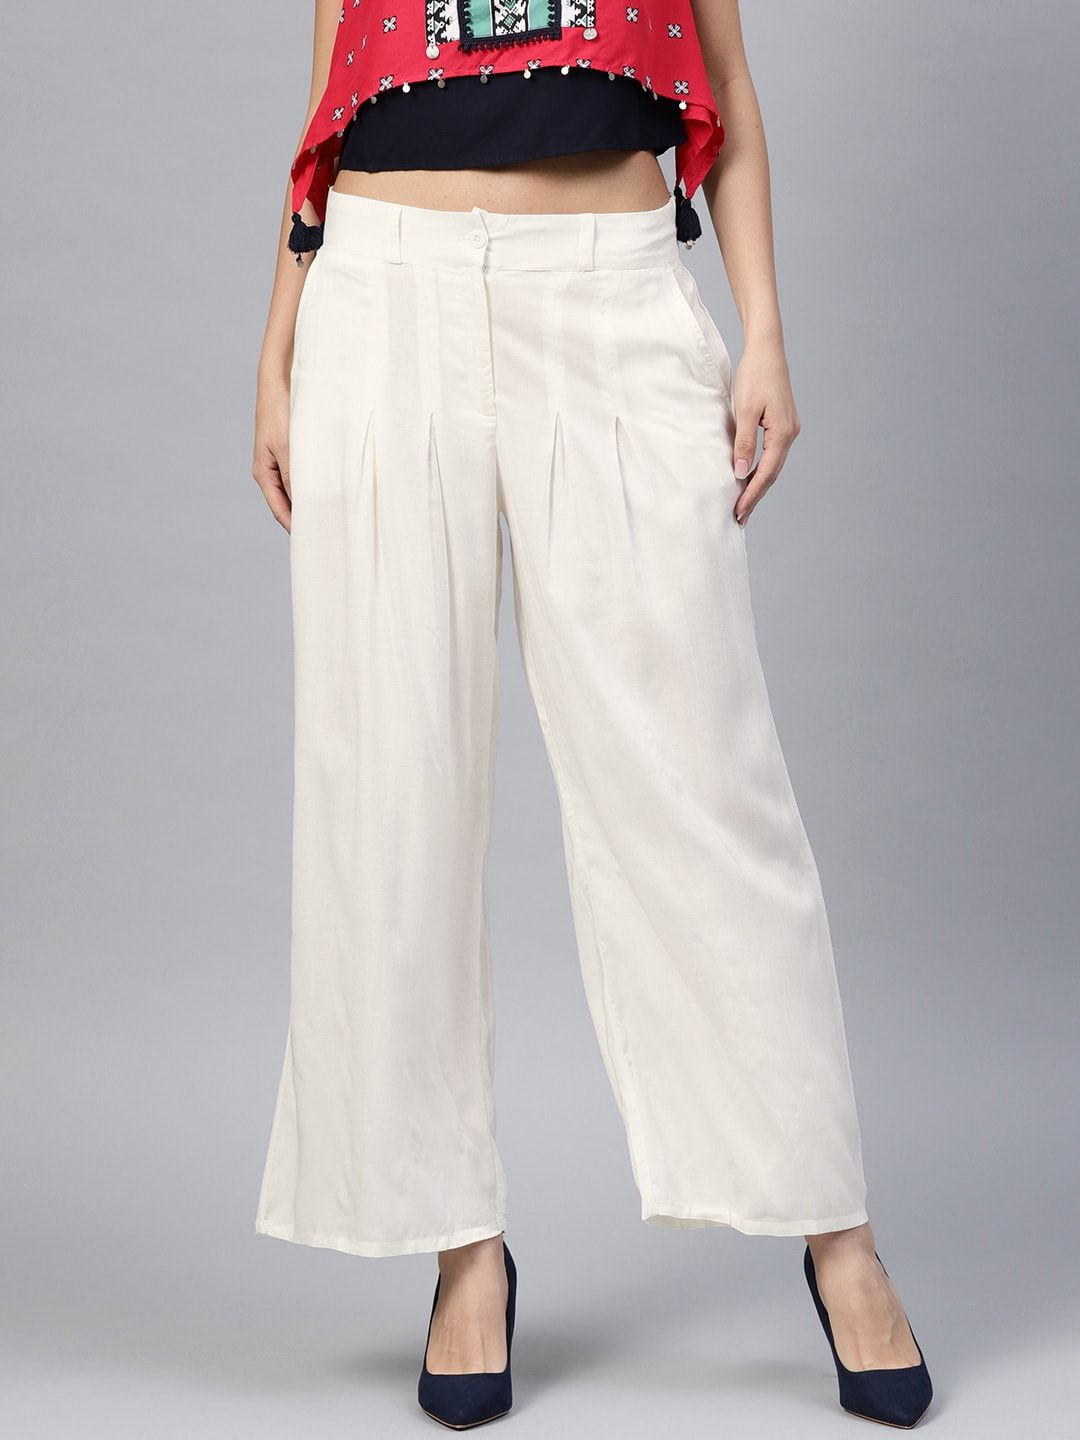 W Women Off-White Regular Fit Solid Parallel Trousers Price in India